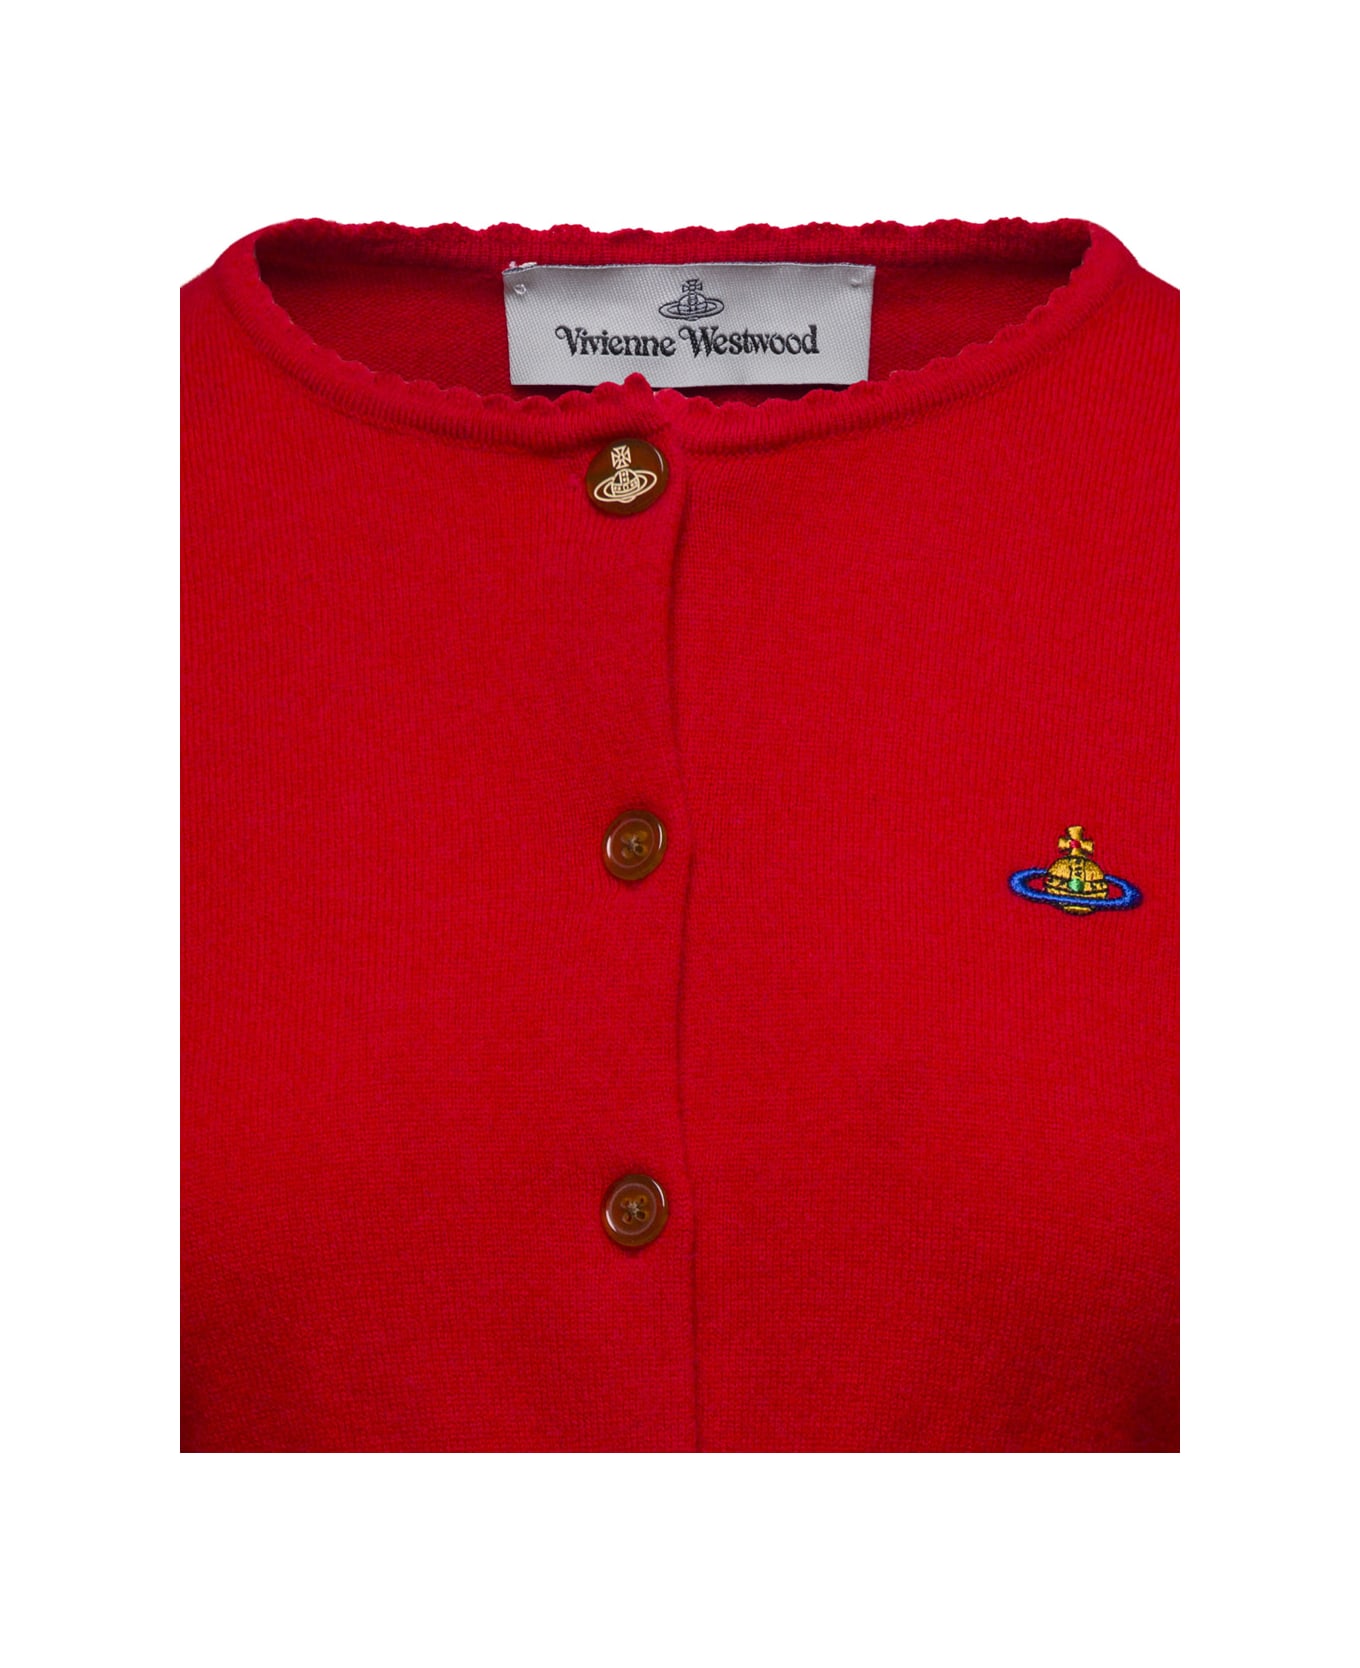 Vivienne Westwood Red Cardigan With Signature Embroidered Orb Logo In Cotton Woman - Red